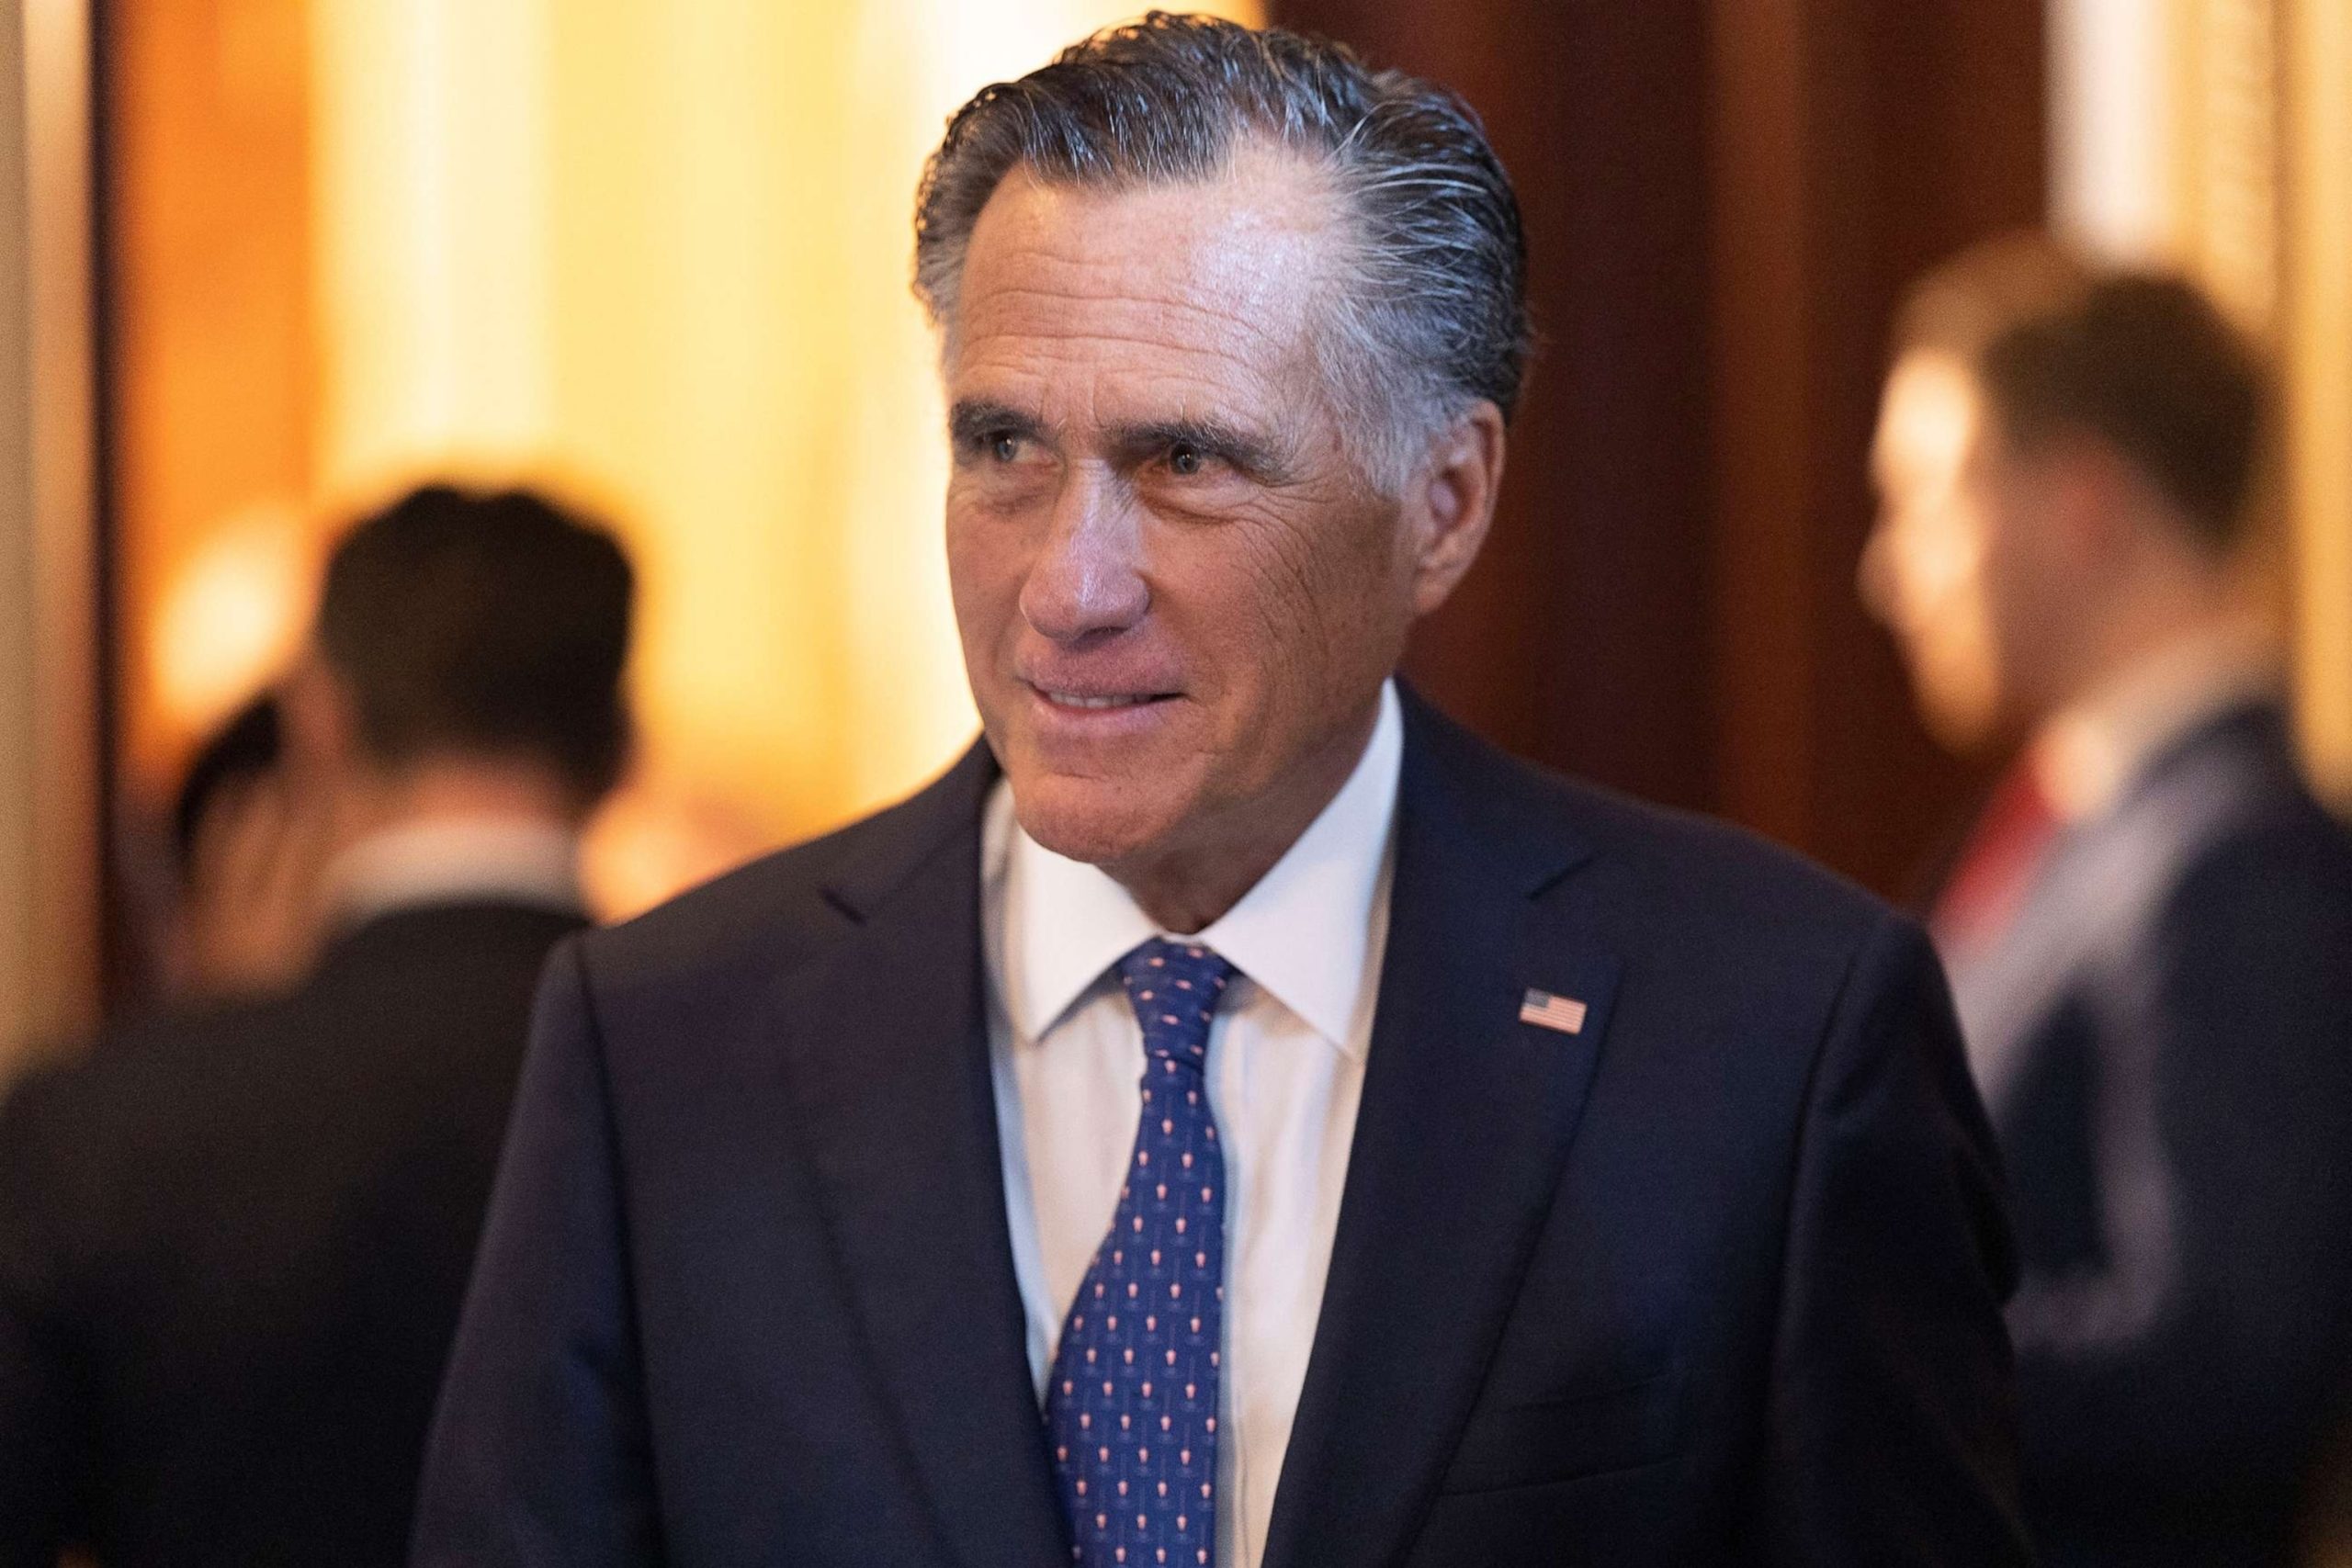 Mitt Romney Declares He Will Not Run for Reelection to the Senate, Citing the Need for a Fresh Generation of Leadership